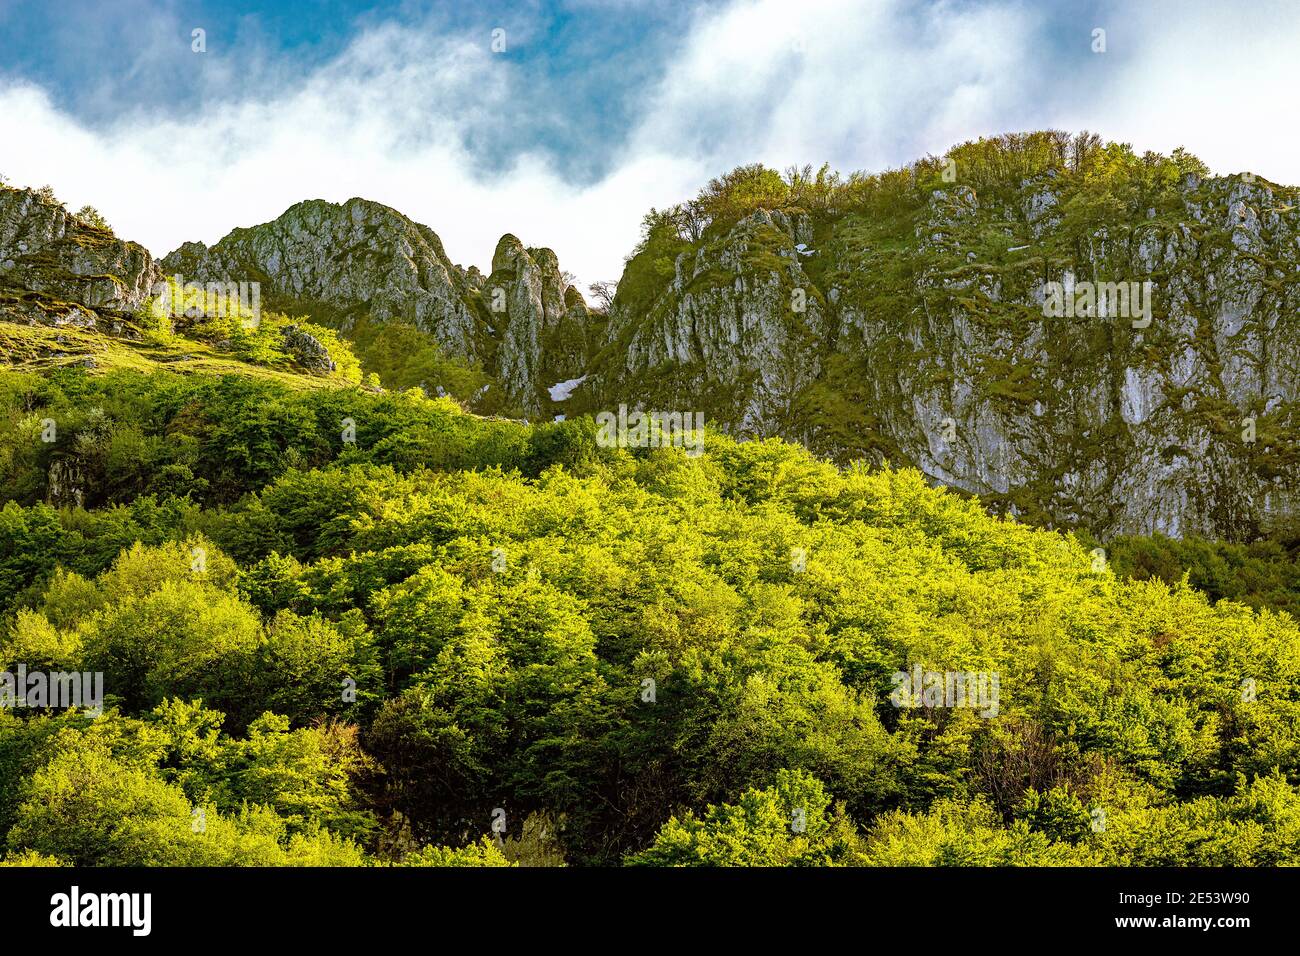 Beech woods, steep walls and high altitude meadows. Maiella National Park, Abruzzo, Italy, Europe Stock Photo